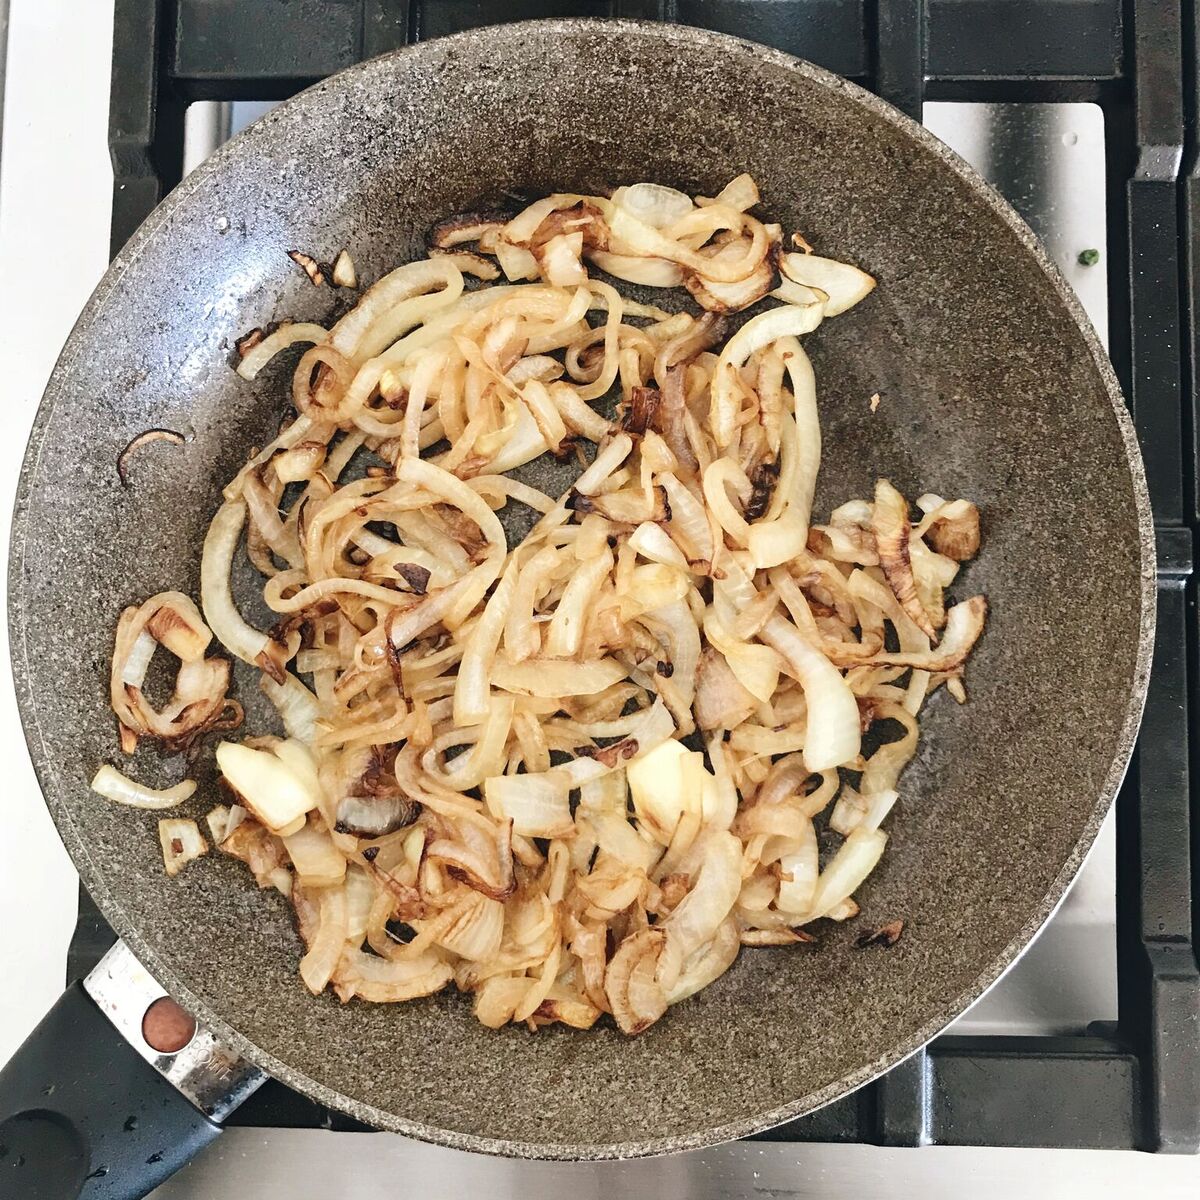 Caramelized onions and garlic